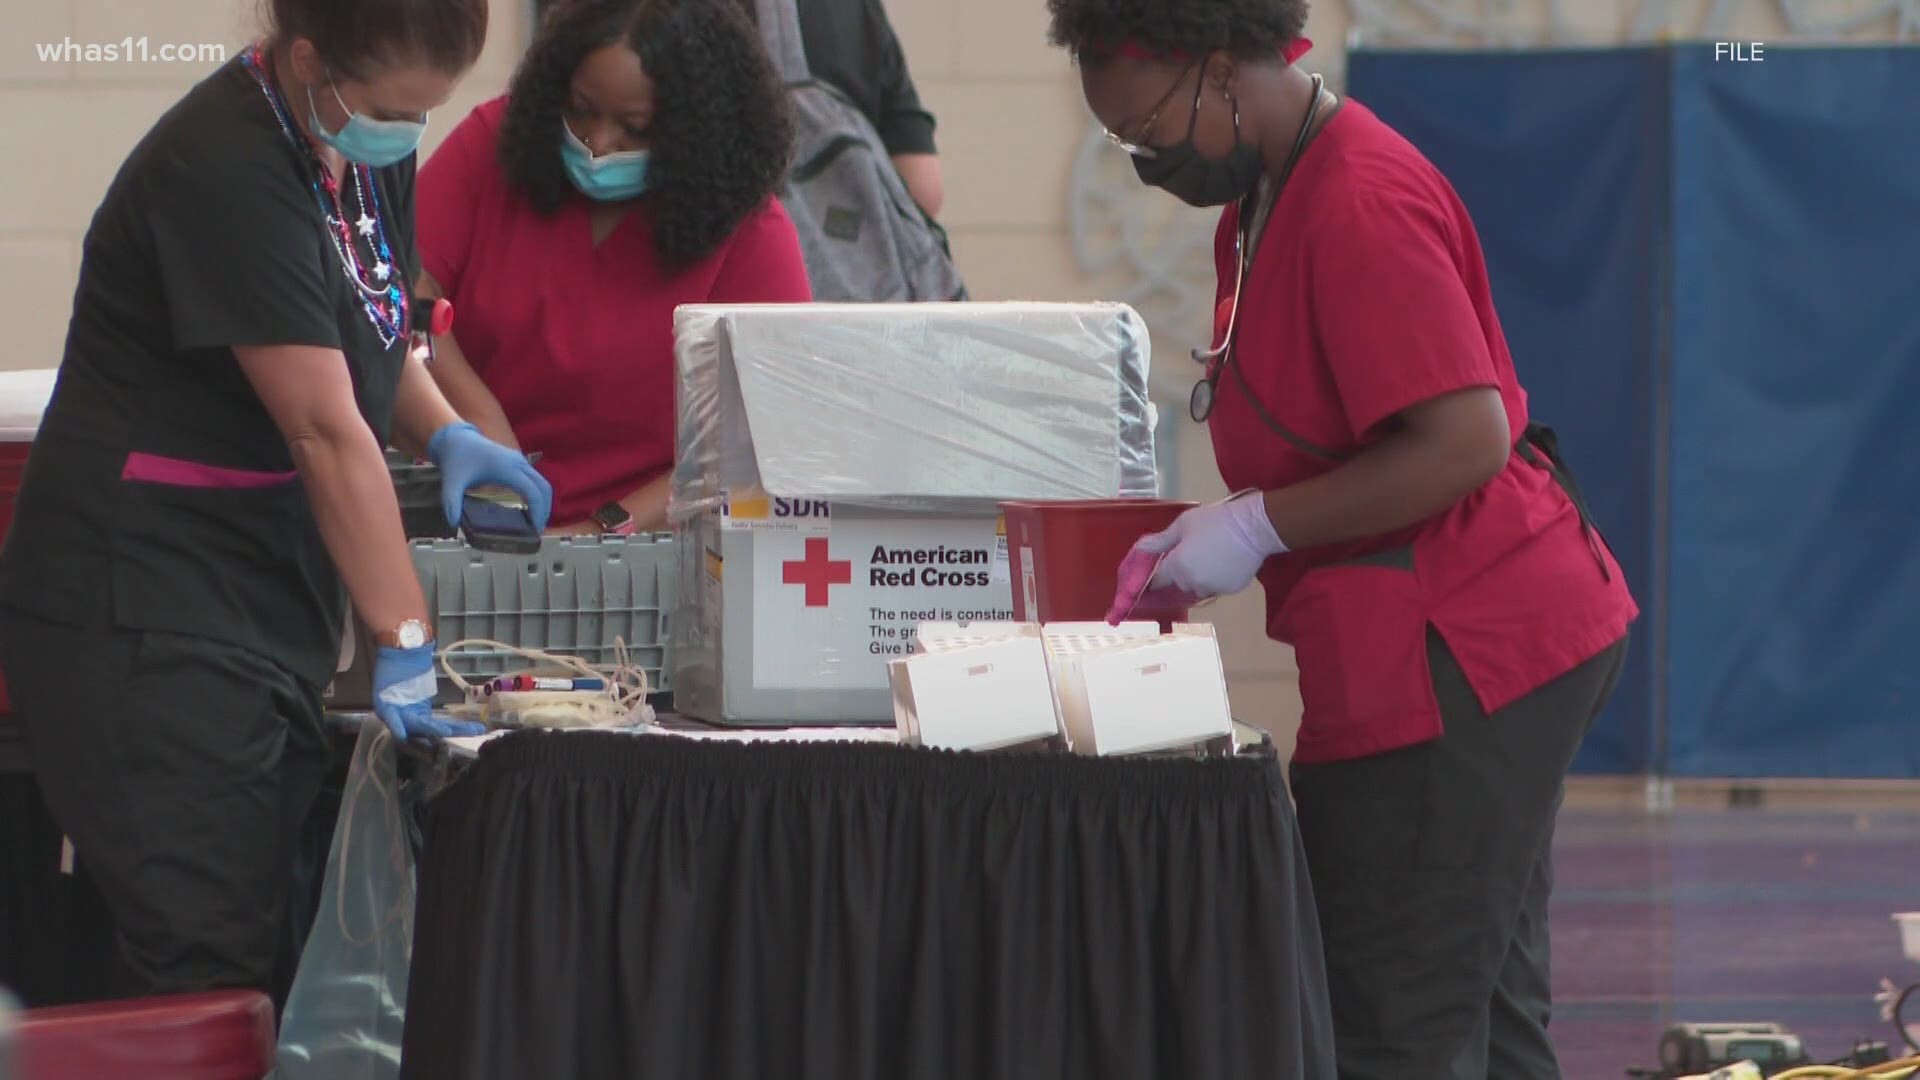 Due to the pandemic, the city is in a critical shortage of lifesaving blood. Officials with UofL says if it gets worse, some transplants could be put on hold.